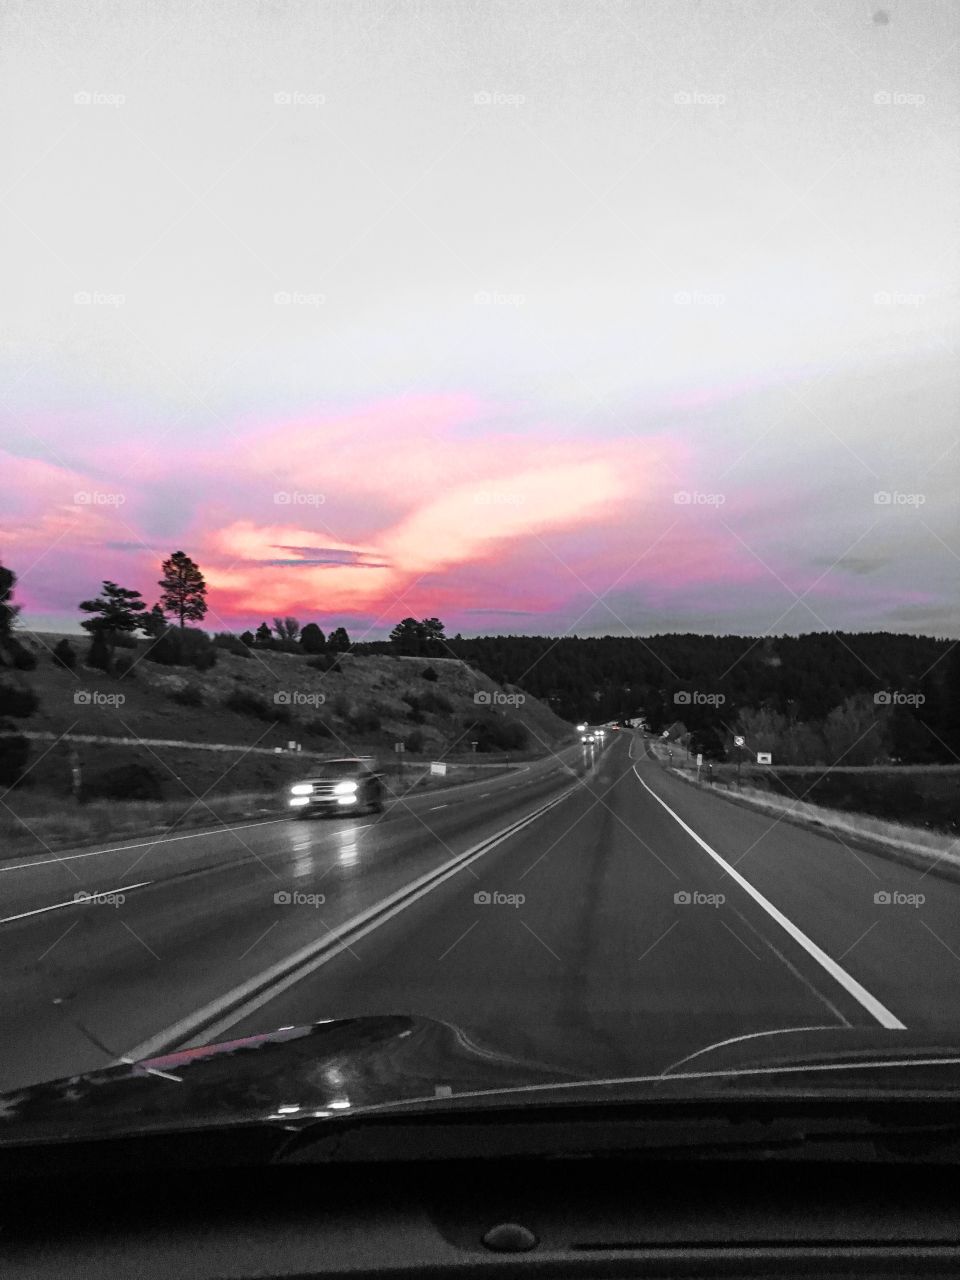 Sunset on the road